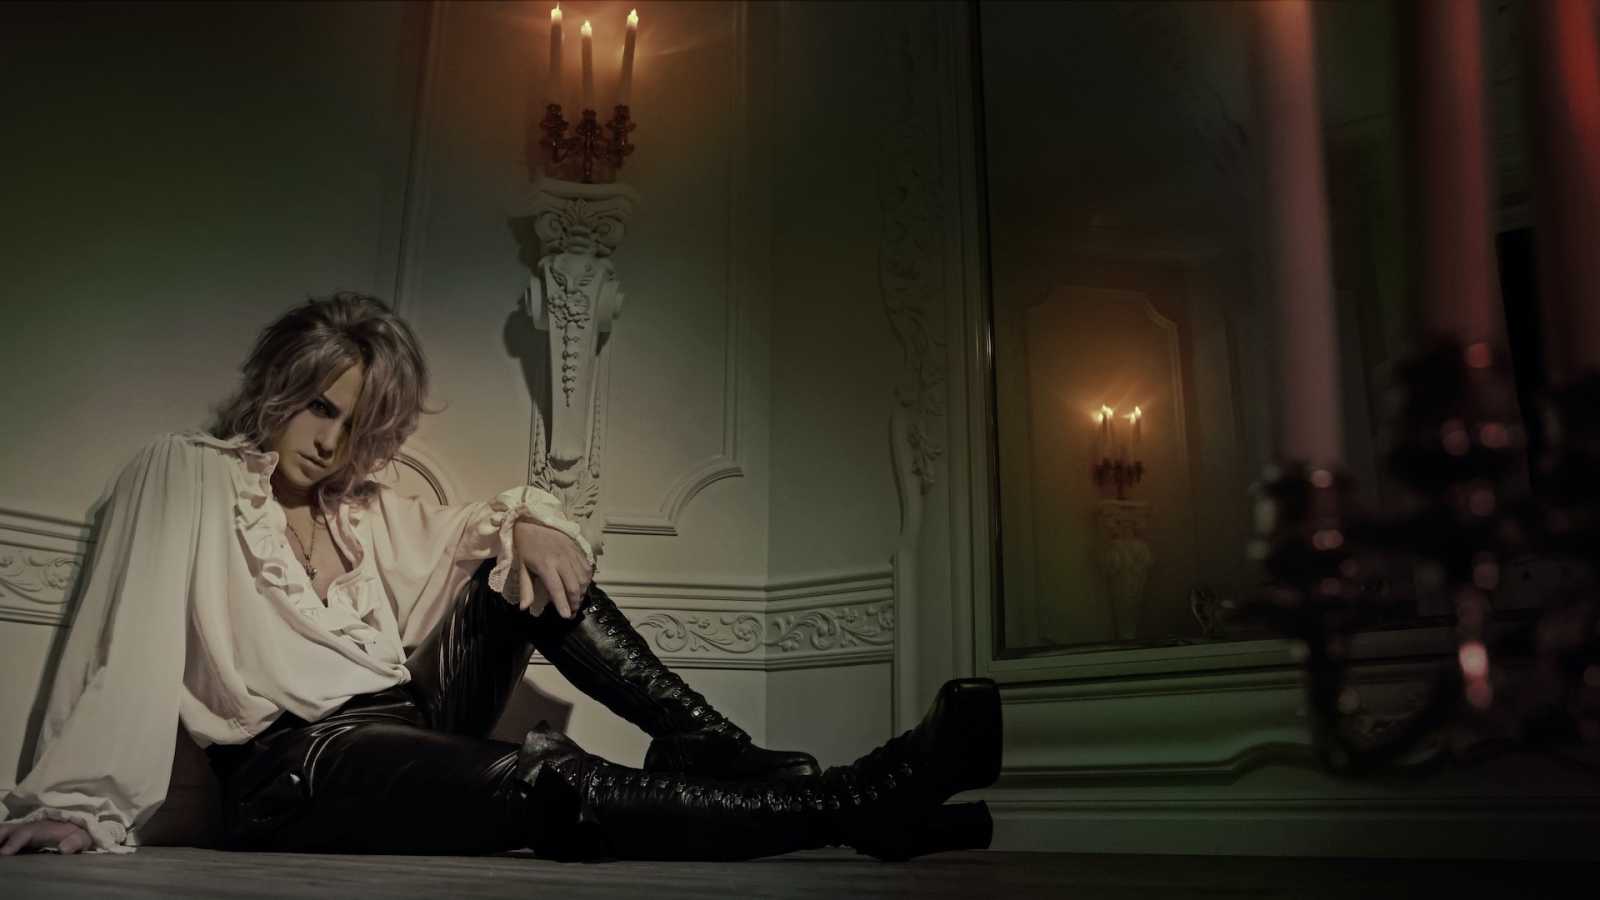 Interview avec KAMIJO © CHATEAU AGENCY CO., Ltd. All rights reserved.